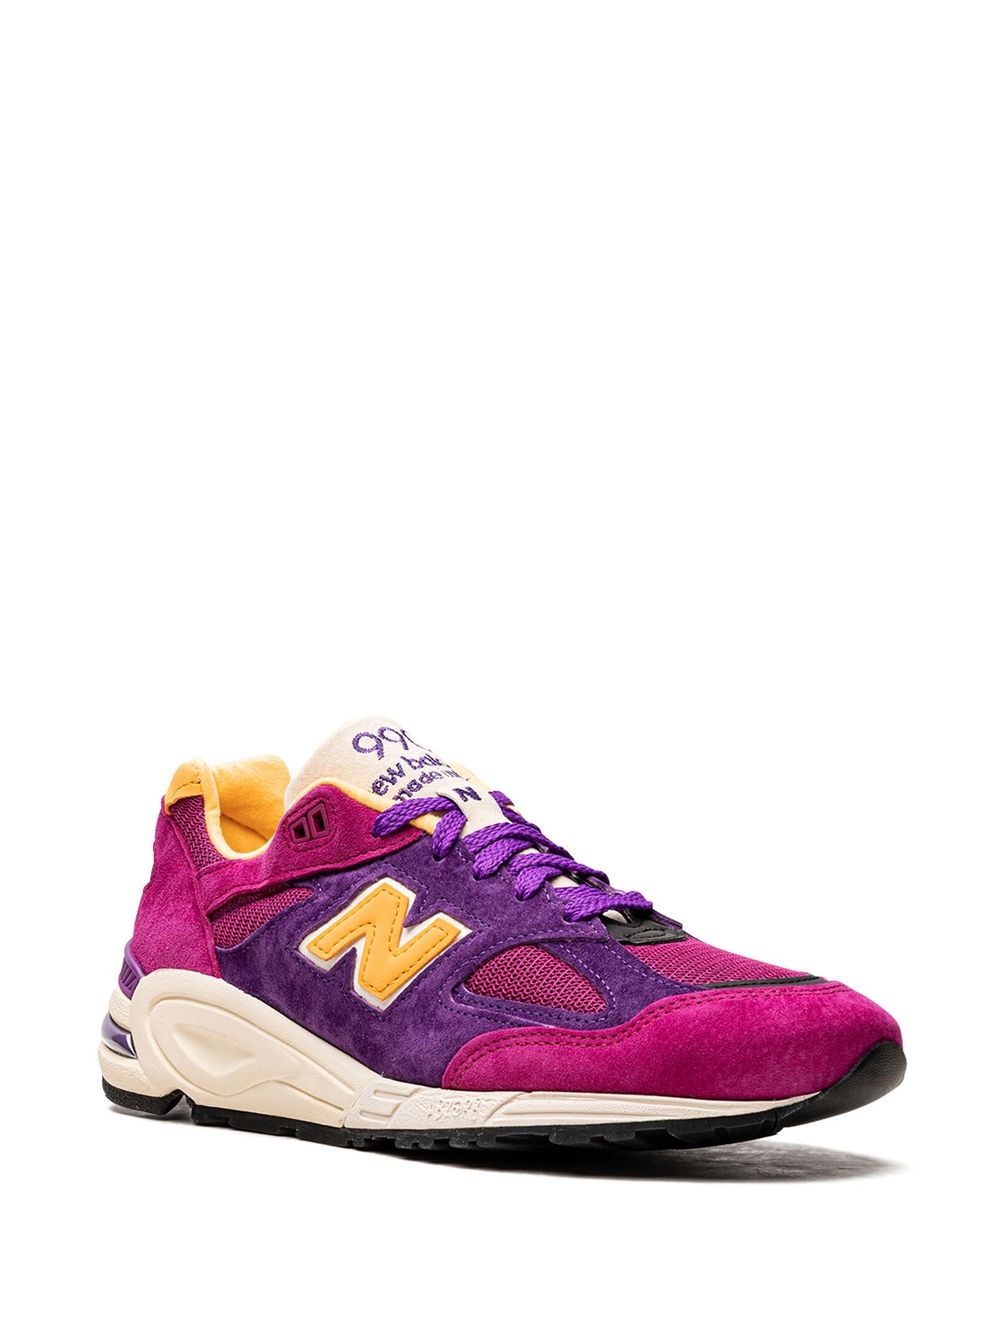 Image 2 of New Balance 990V2 "Pink/Purple" sneakers